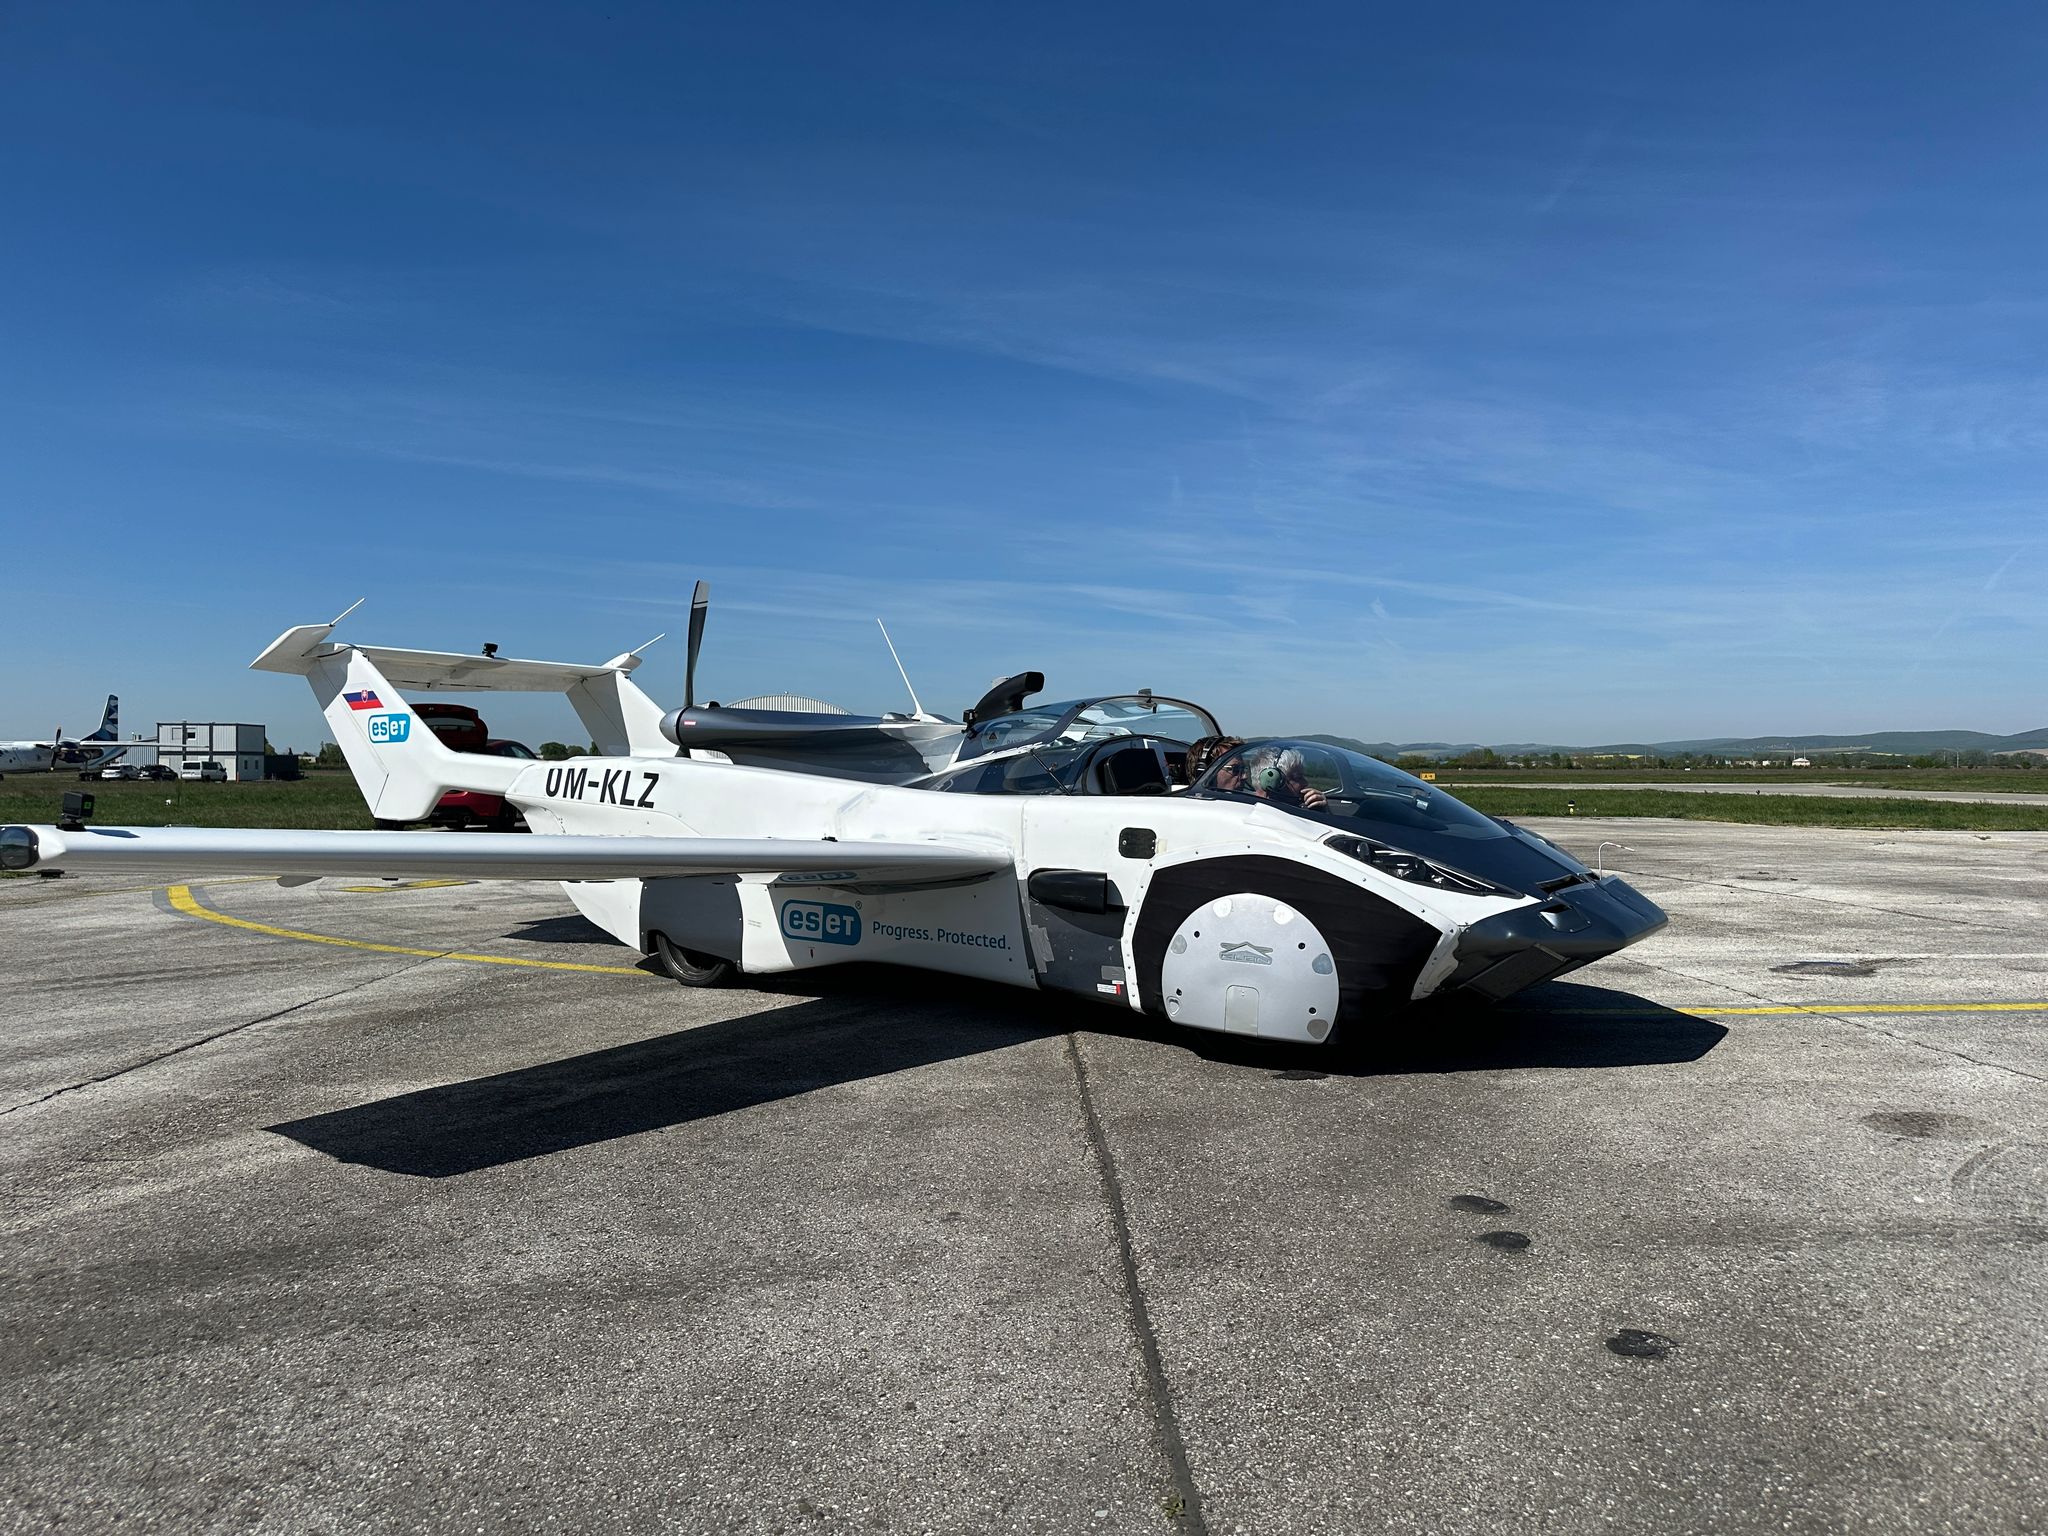 JMade in Slovakia by Professor Stefan Klein and KleinVision's co-founder Anton Zajac, the AirCar was approved for flight in 2022